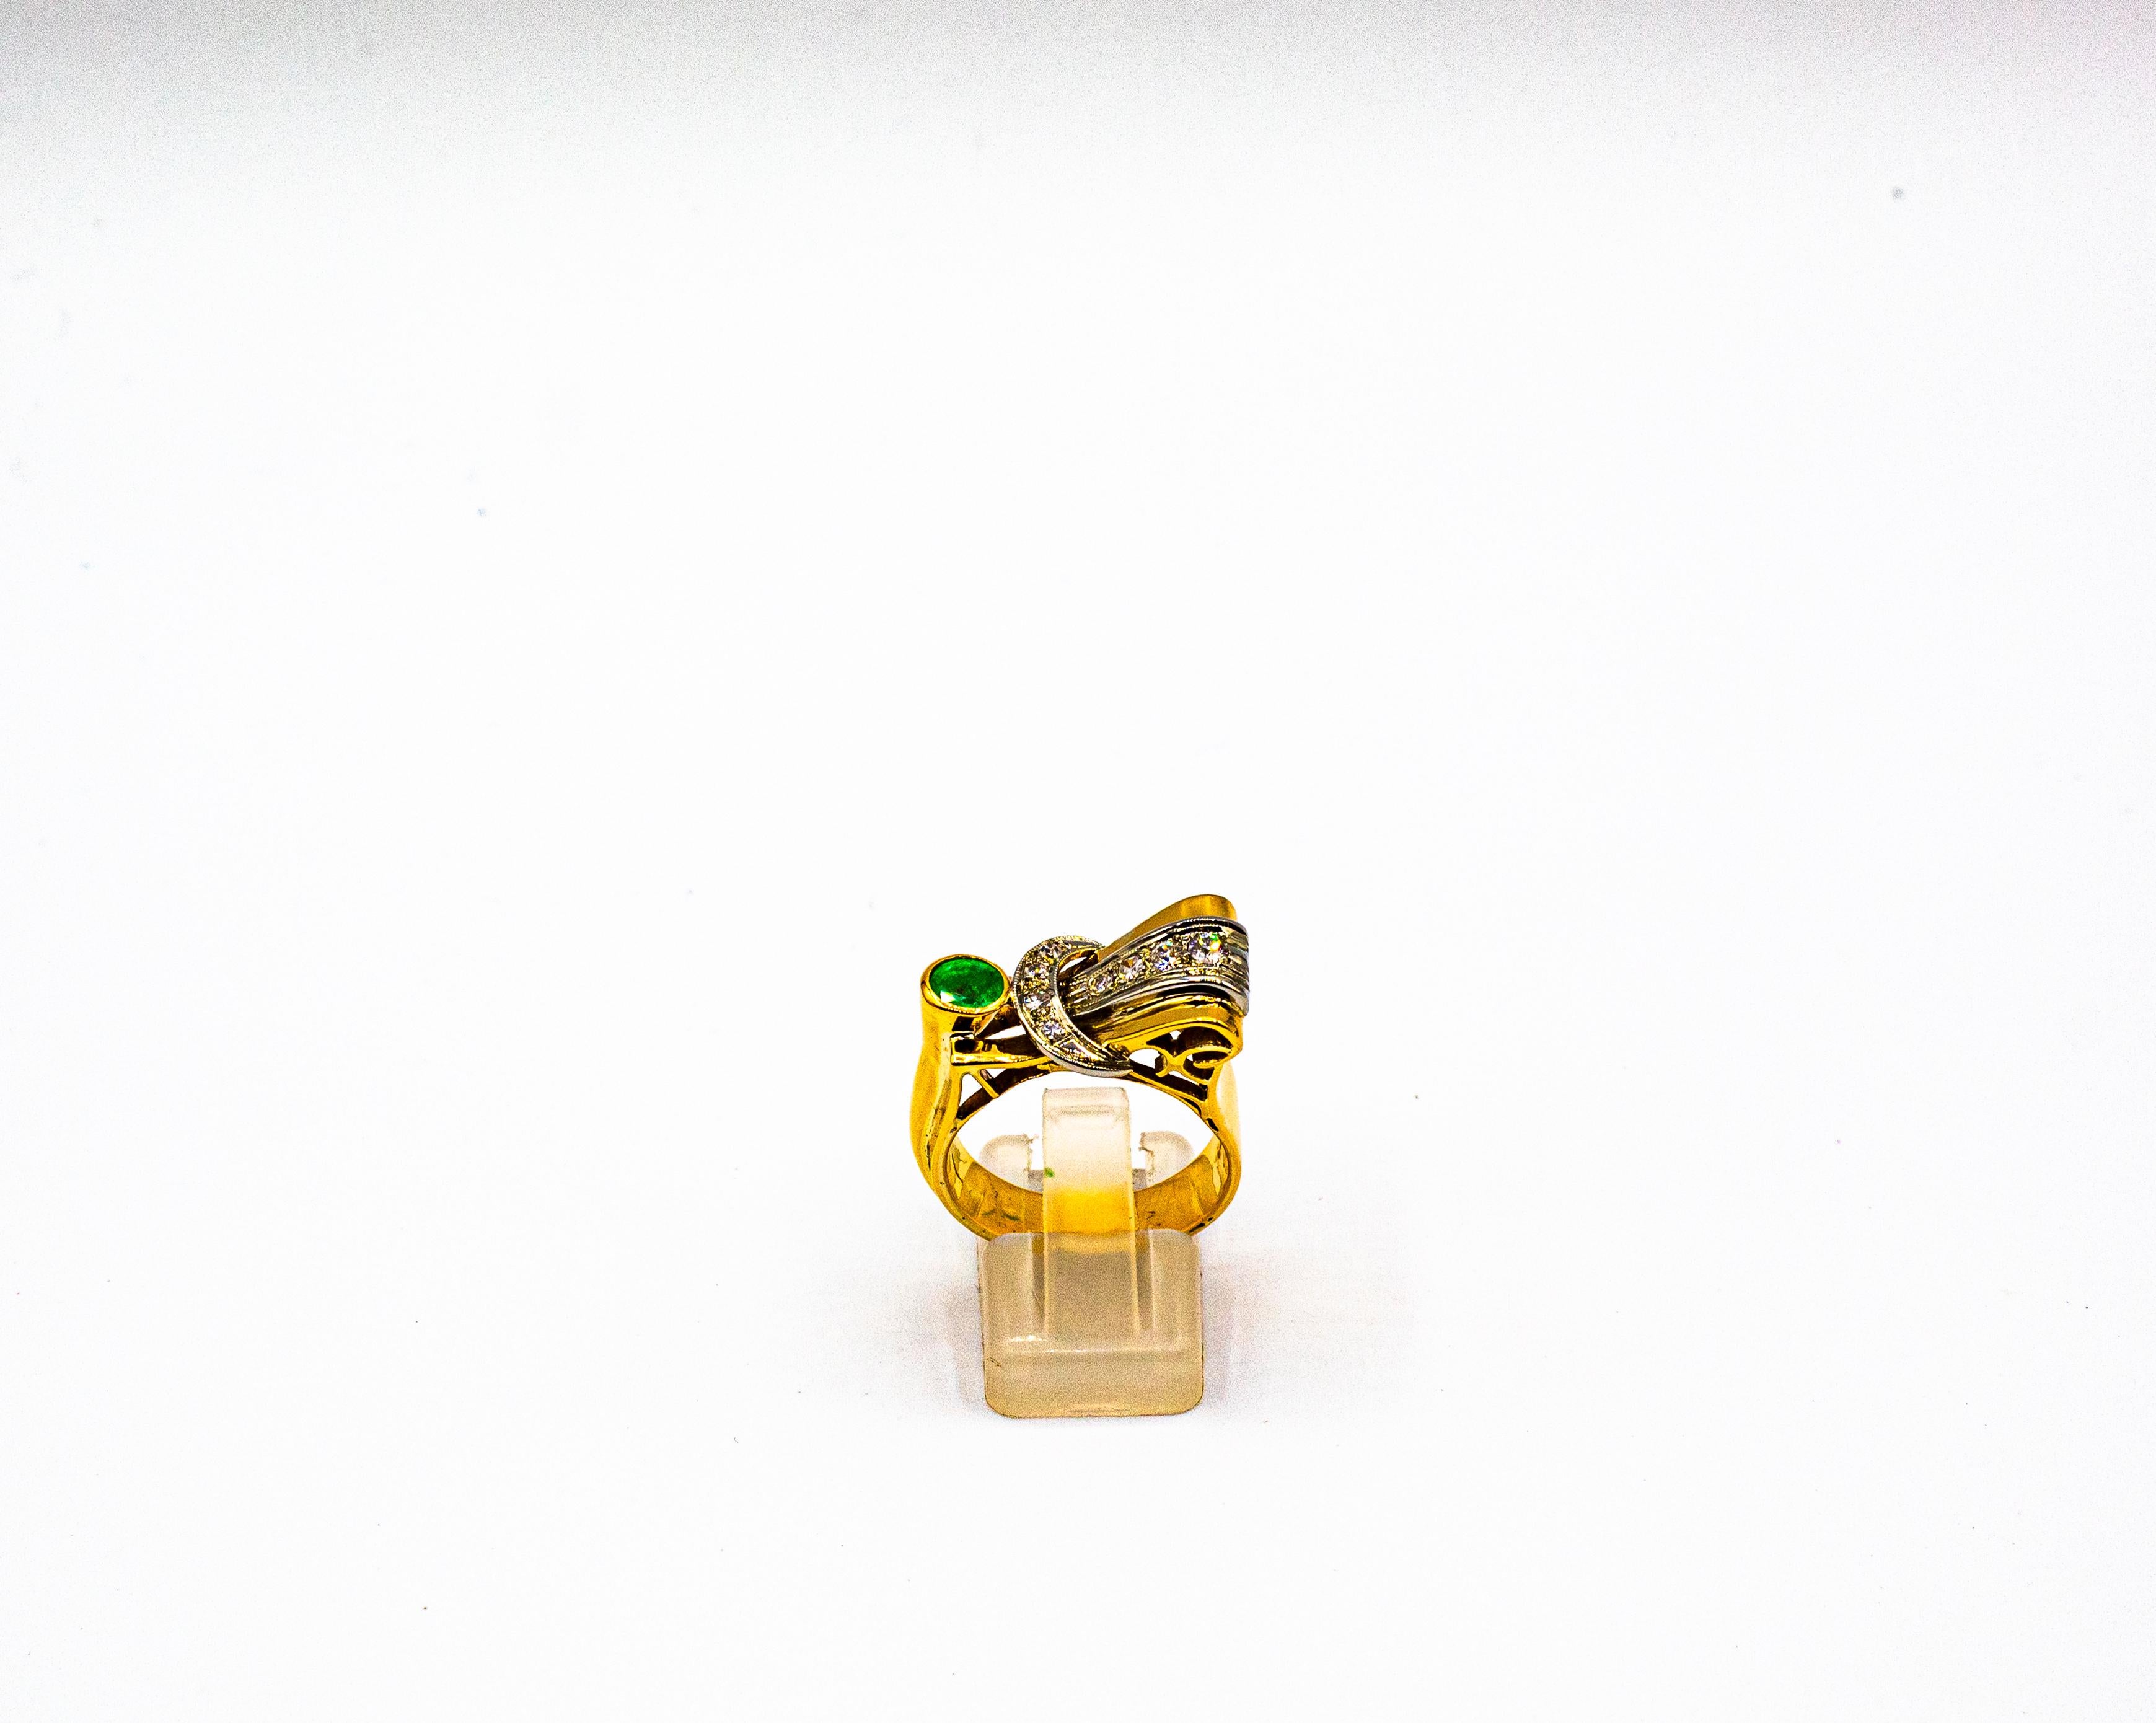 This Ring is made of 18K White and Yellow Gold.
This Ring has 0.25 Carats of White Brilliant Cut Diamonds.
This Ring has a 0.50 Carats Emerald.

Size ITA: 18 USA: 8 1/4

We're a workshop so every piece is handmade, customizable and resizable.